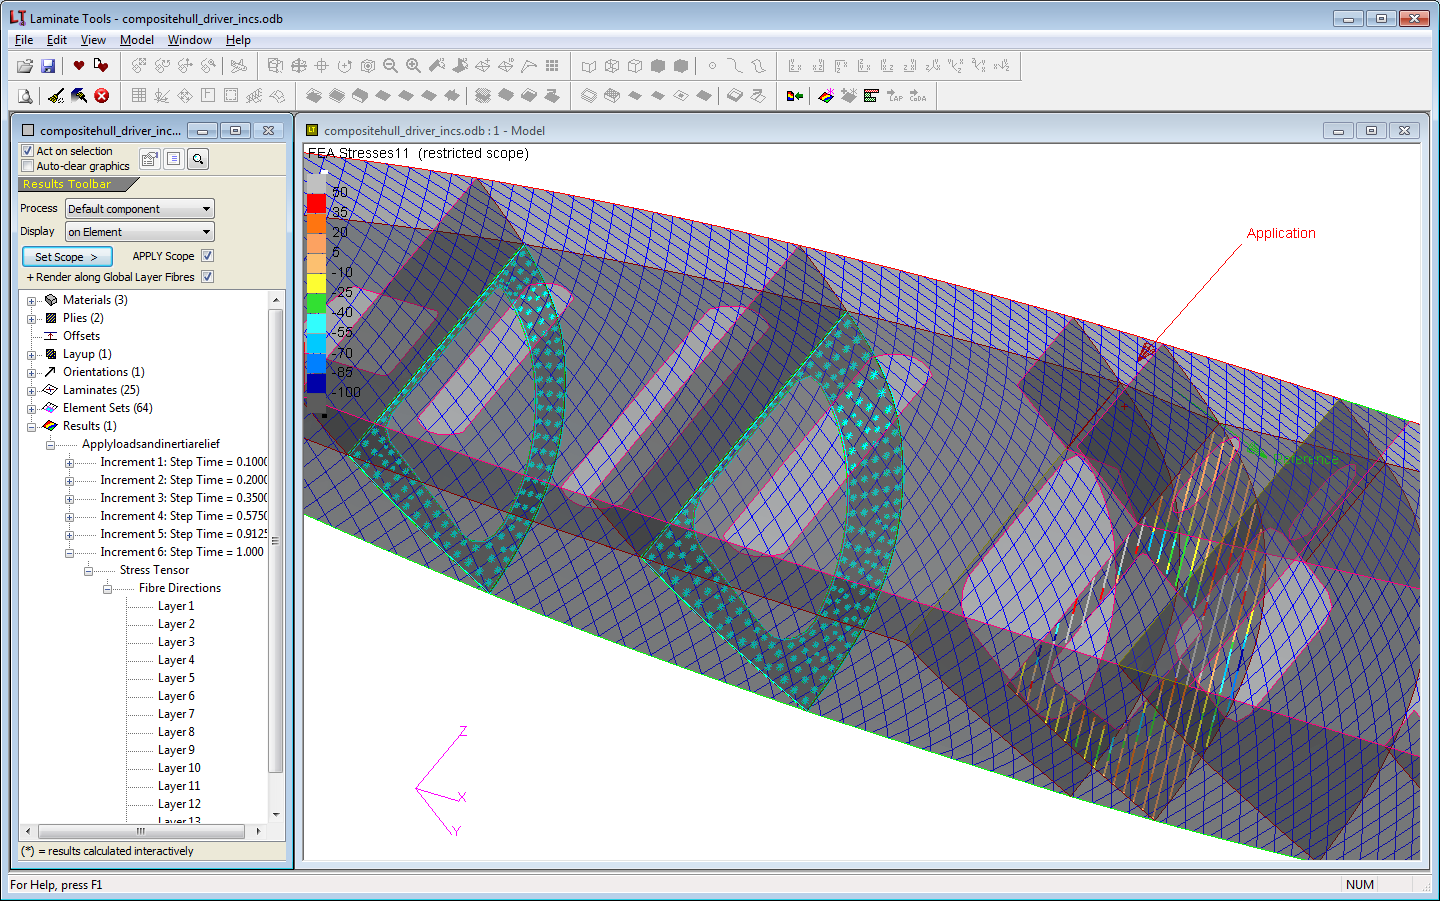 Laminate Tools Version 4.6 brings a number of improvements to the FEA and CAD interfaces.